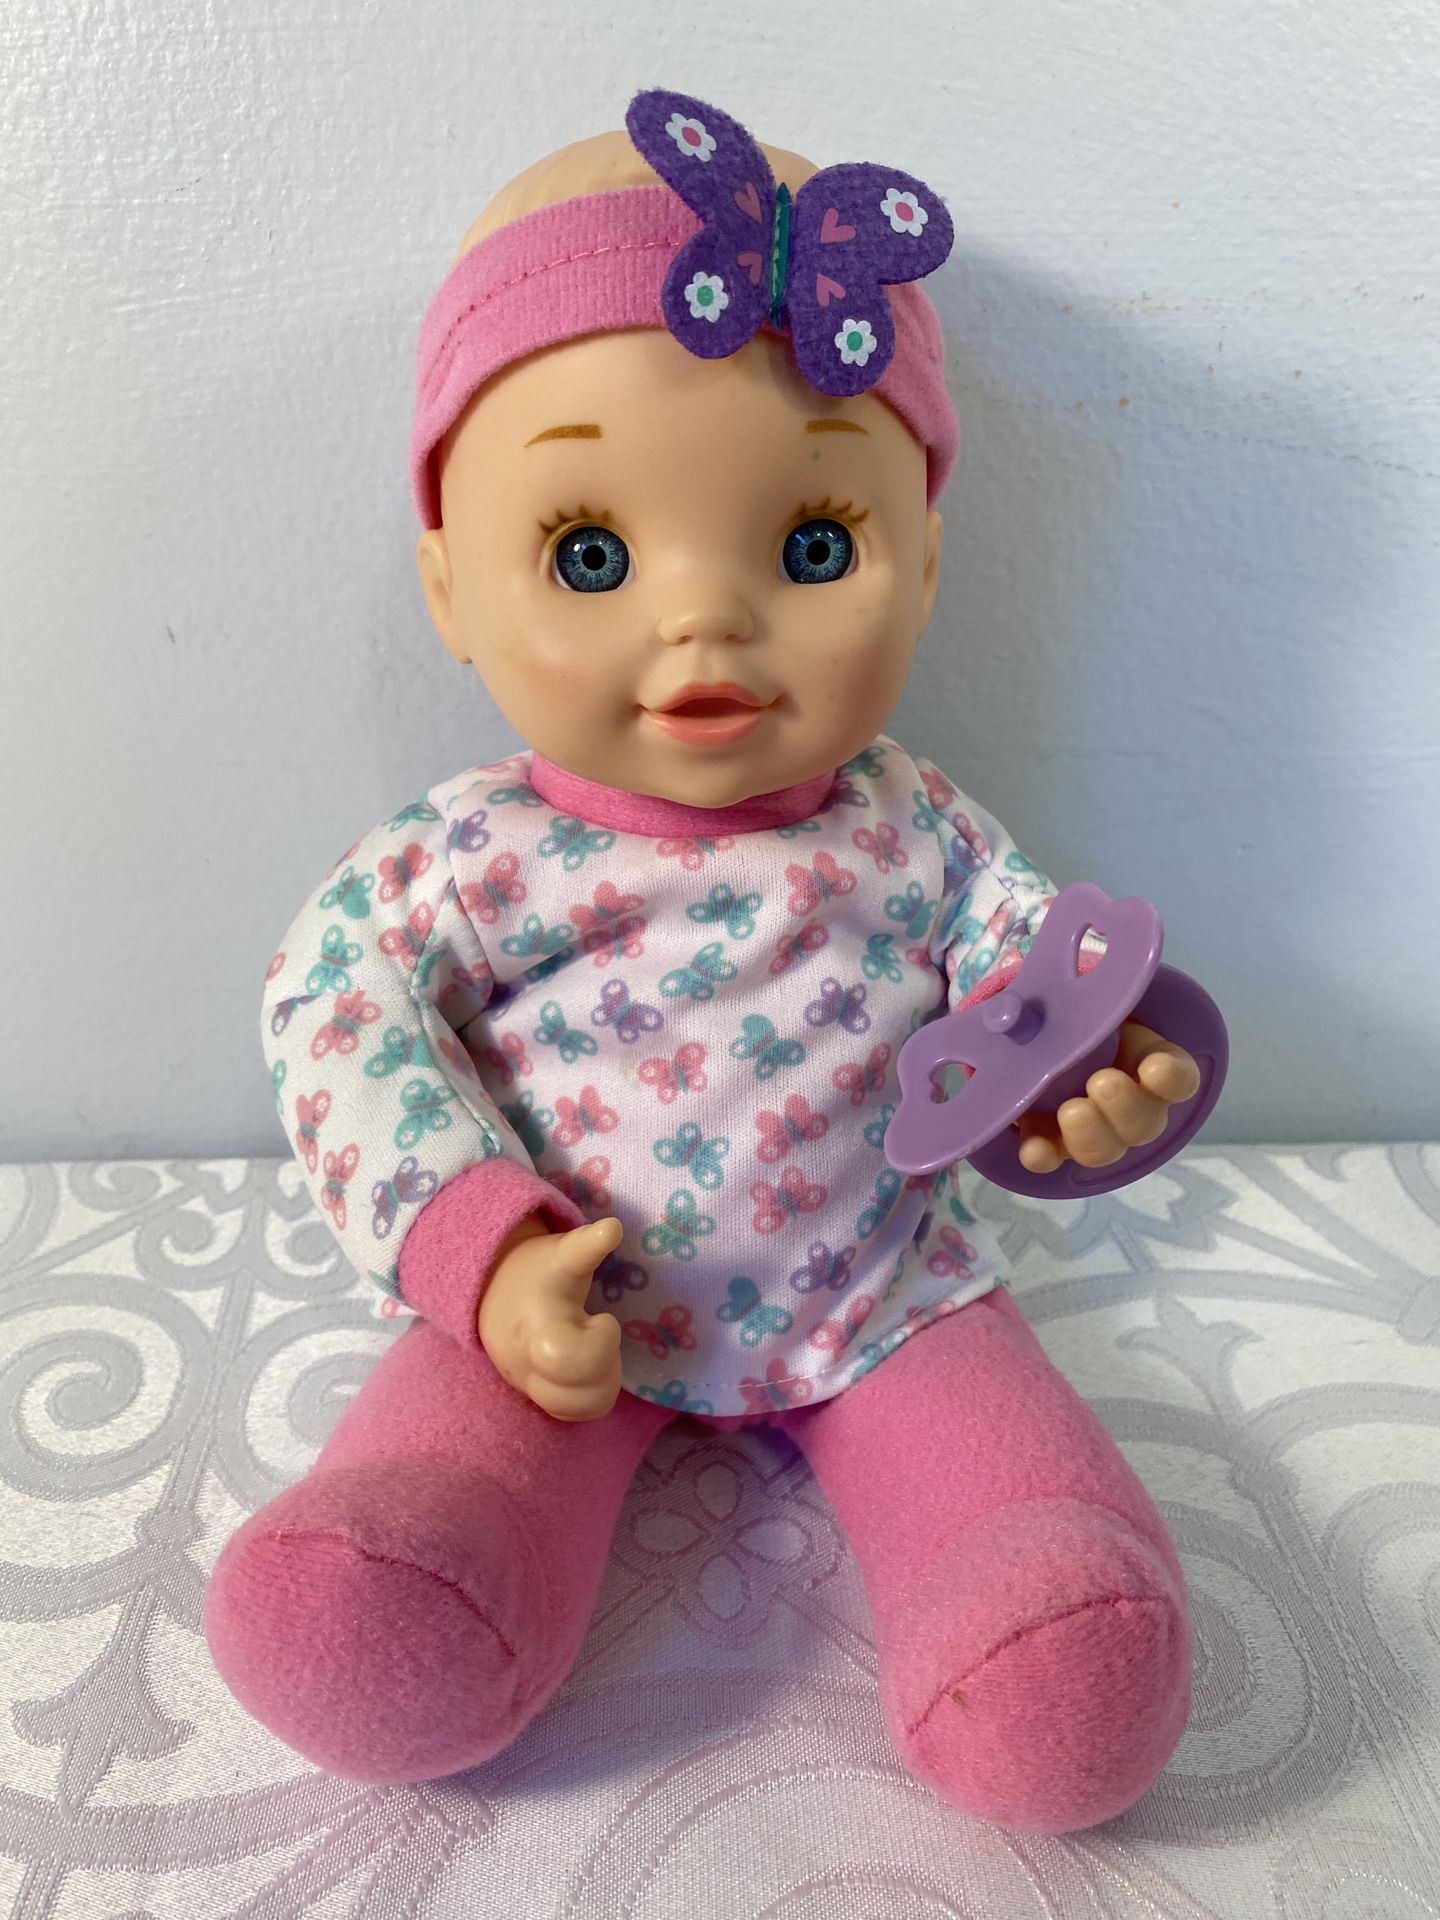 You & Me Magic Pacifier Baby Doll Toys R Us Interactive Talks Giggles 11”